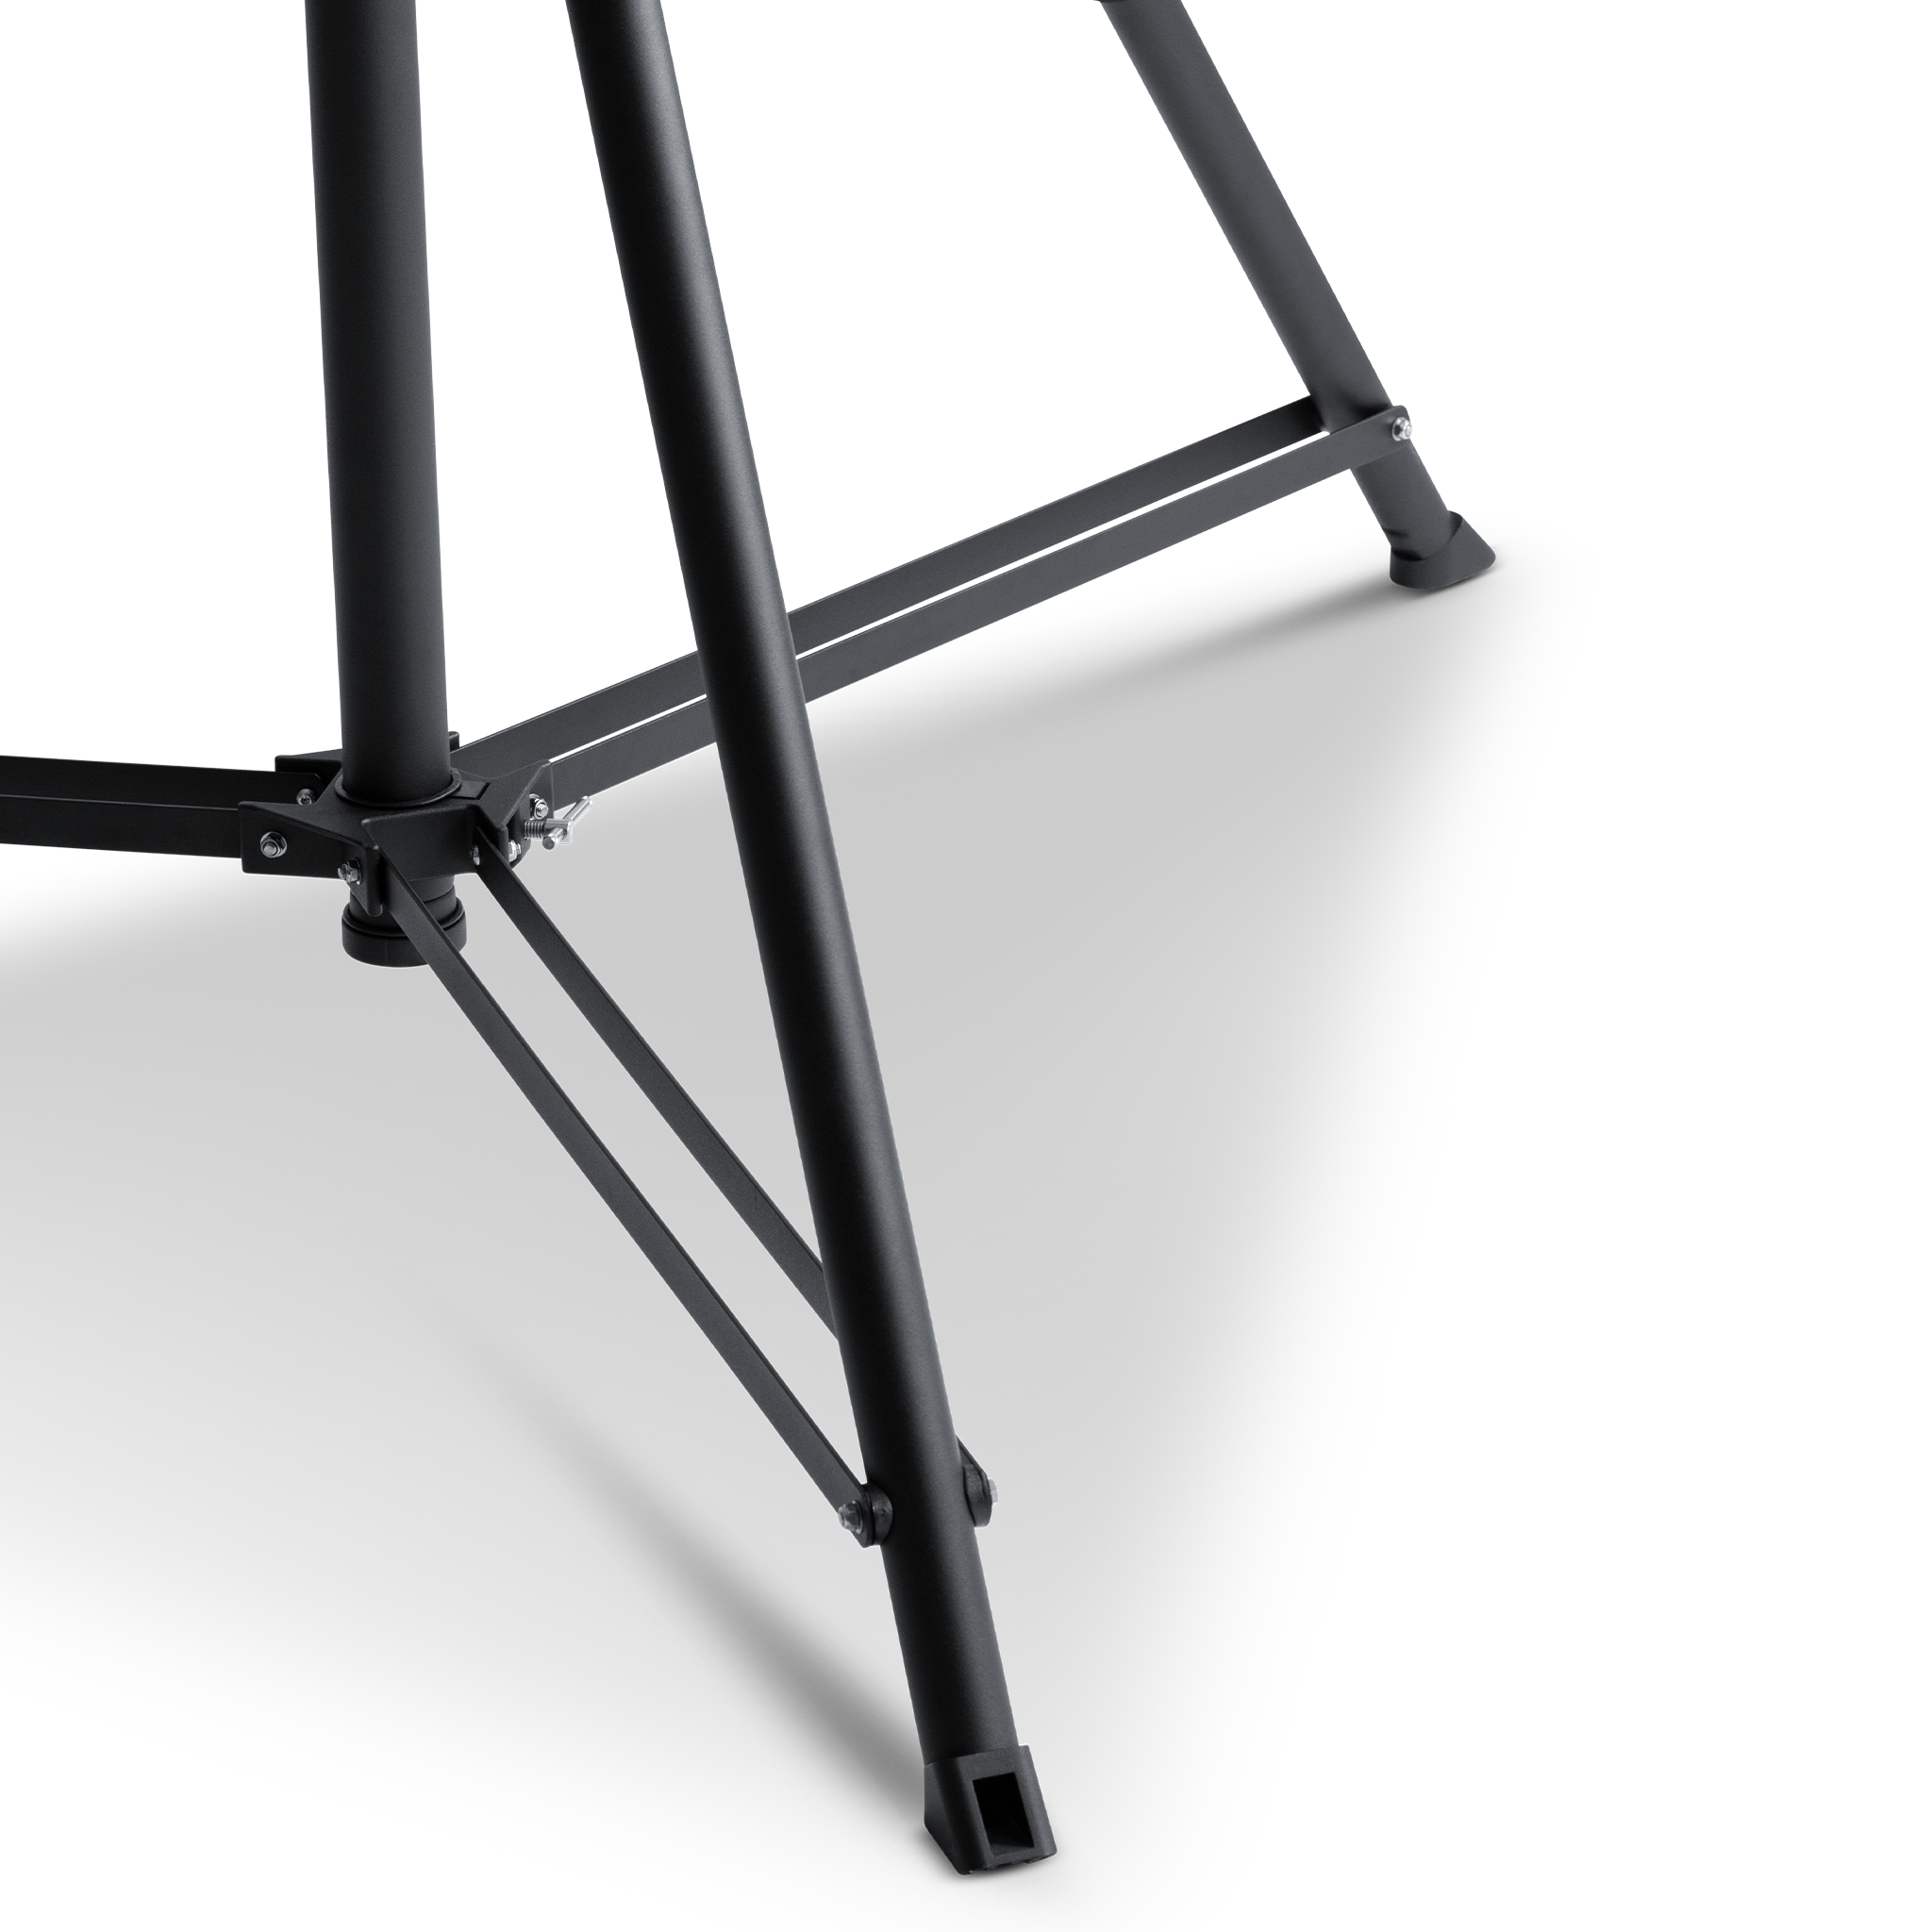 G3 12ft Tripod Stand With Carry Bag